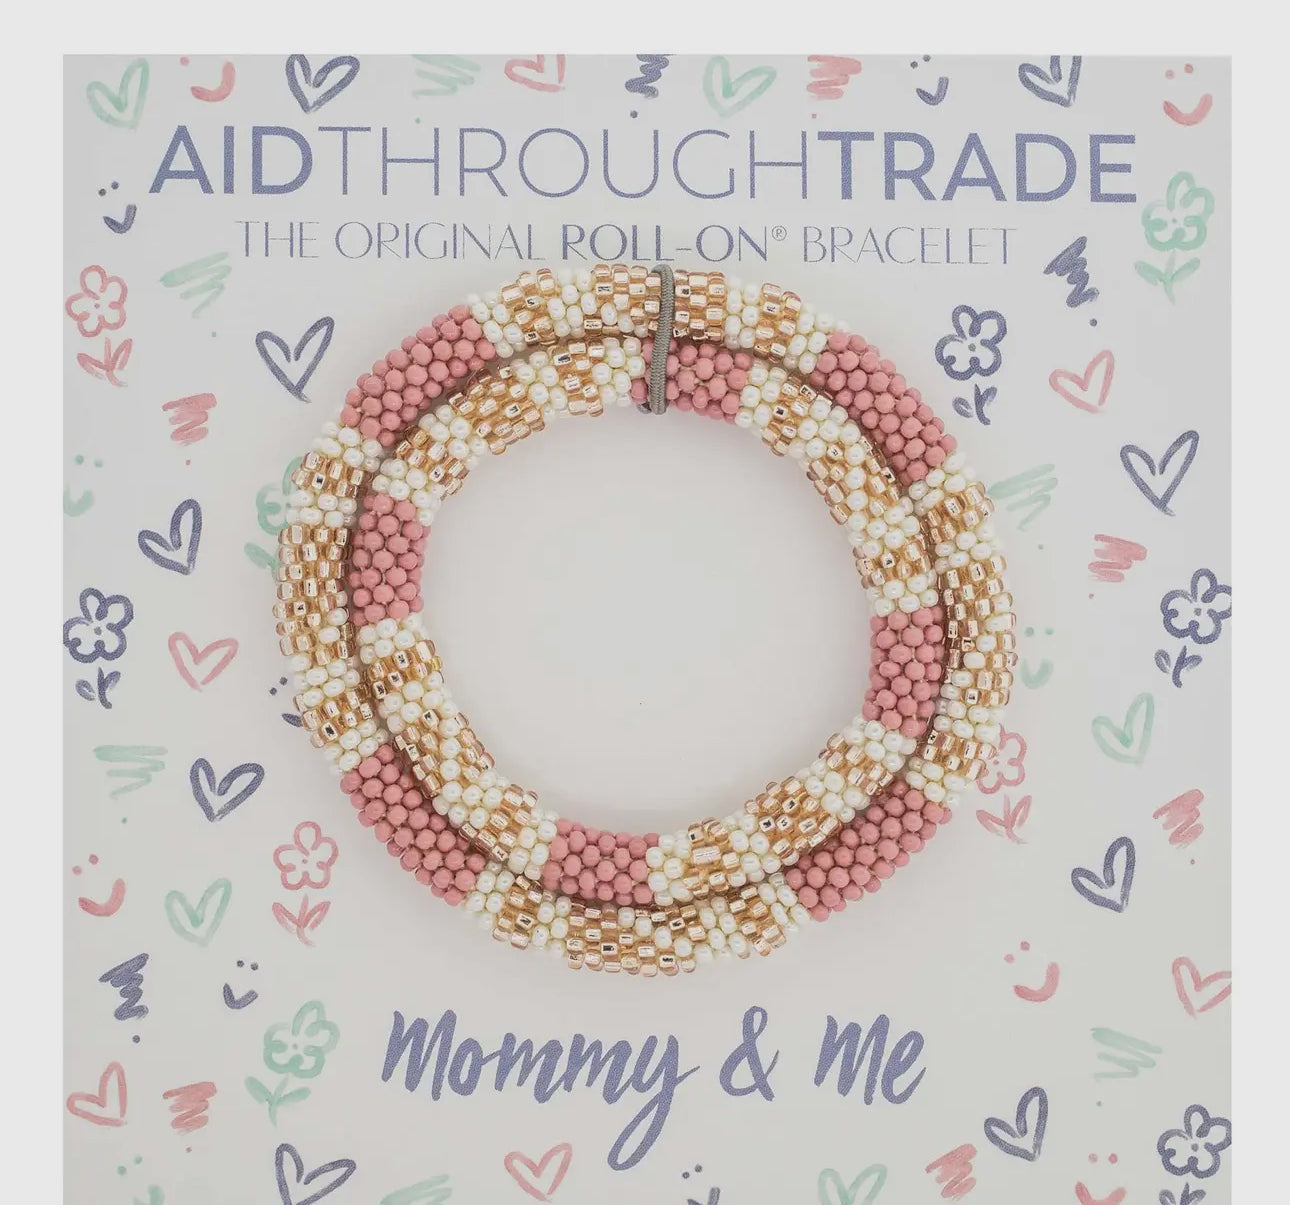 Roll on mommy and me bracelets